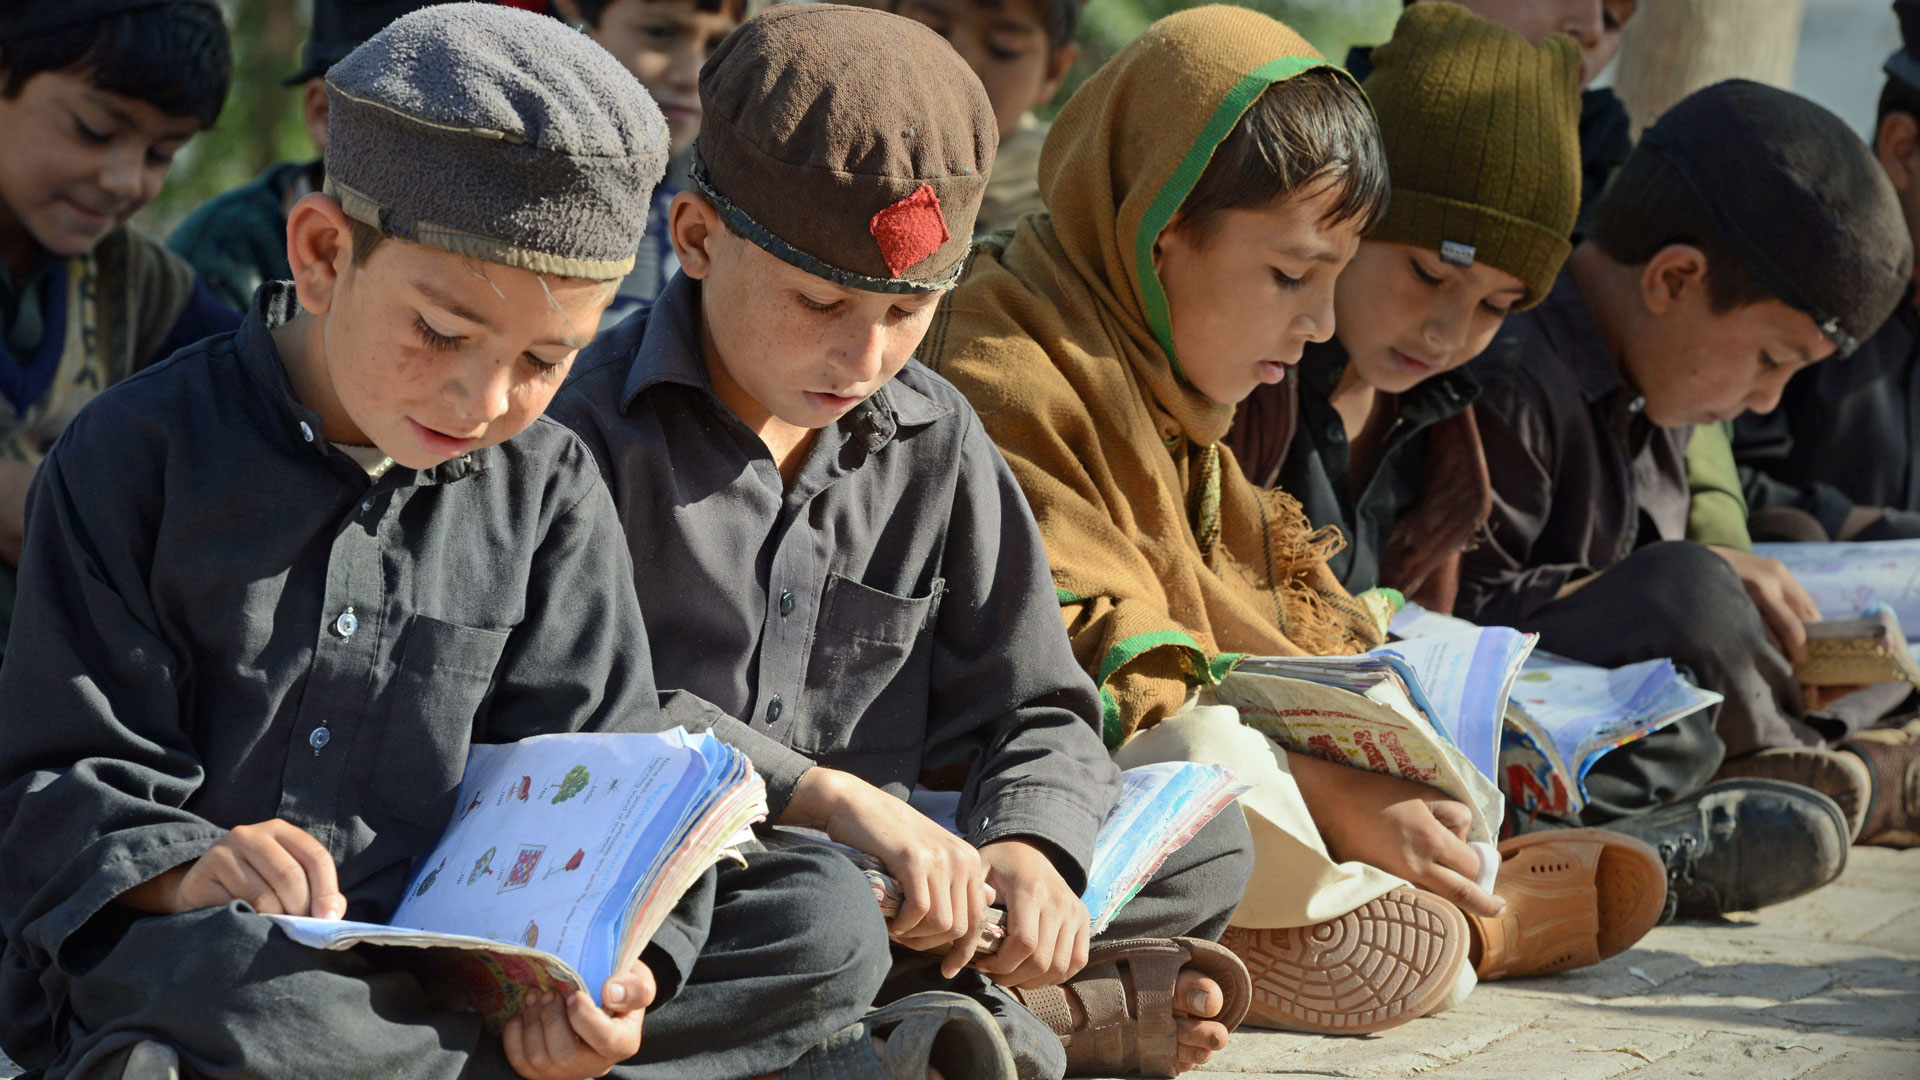 Primary education for girls and boys in the Tribal Areas (Pakistan)